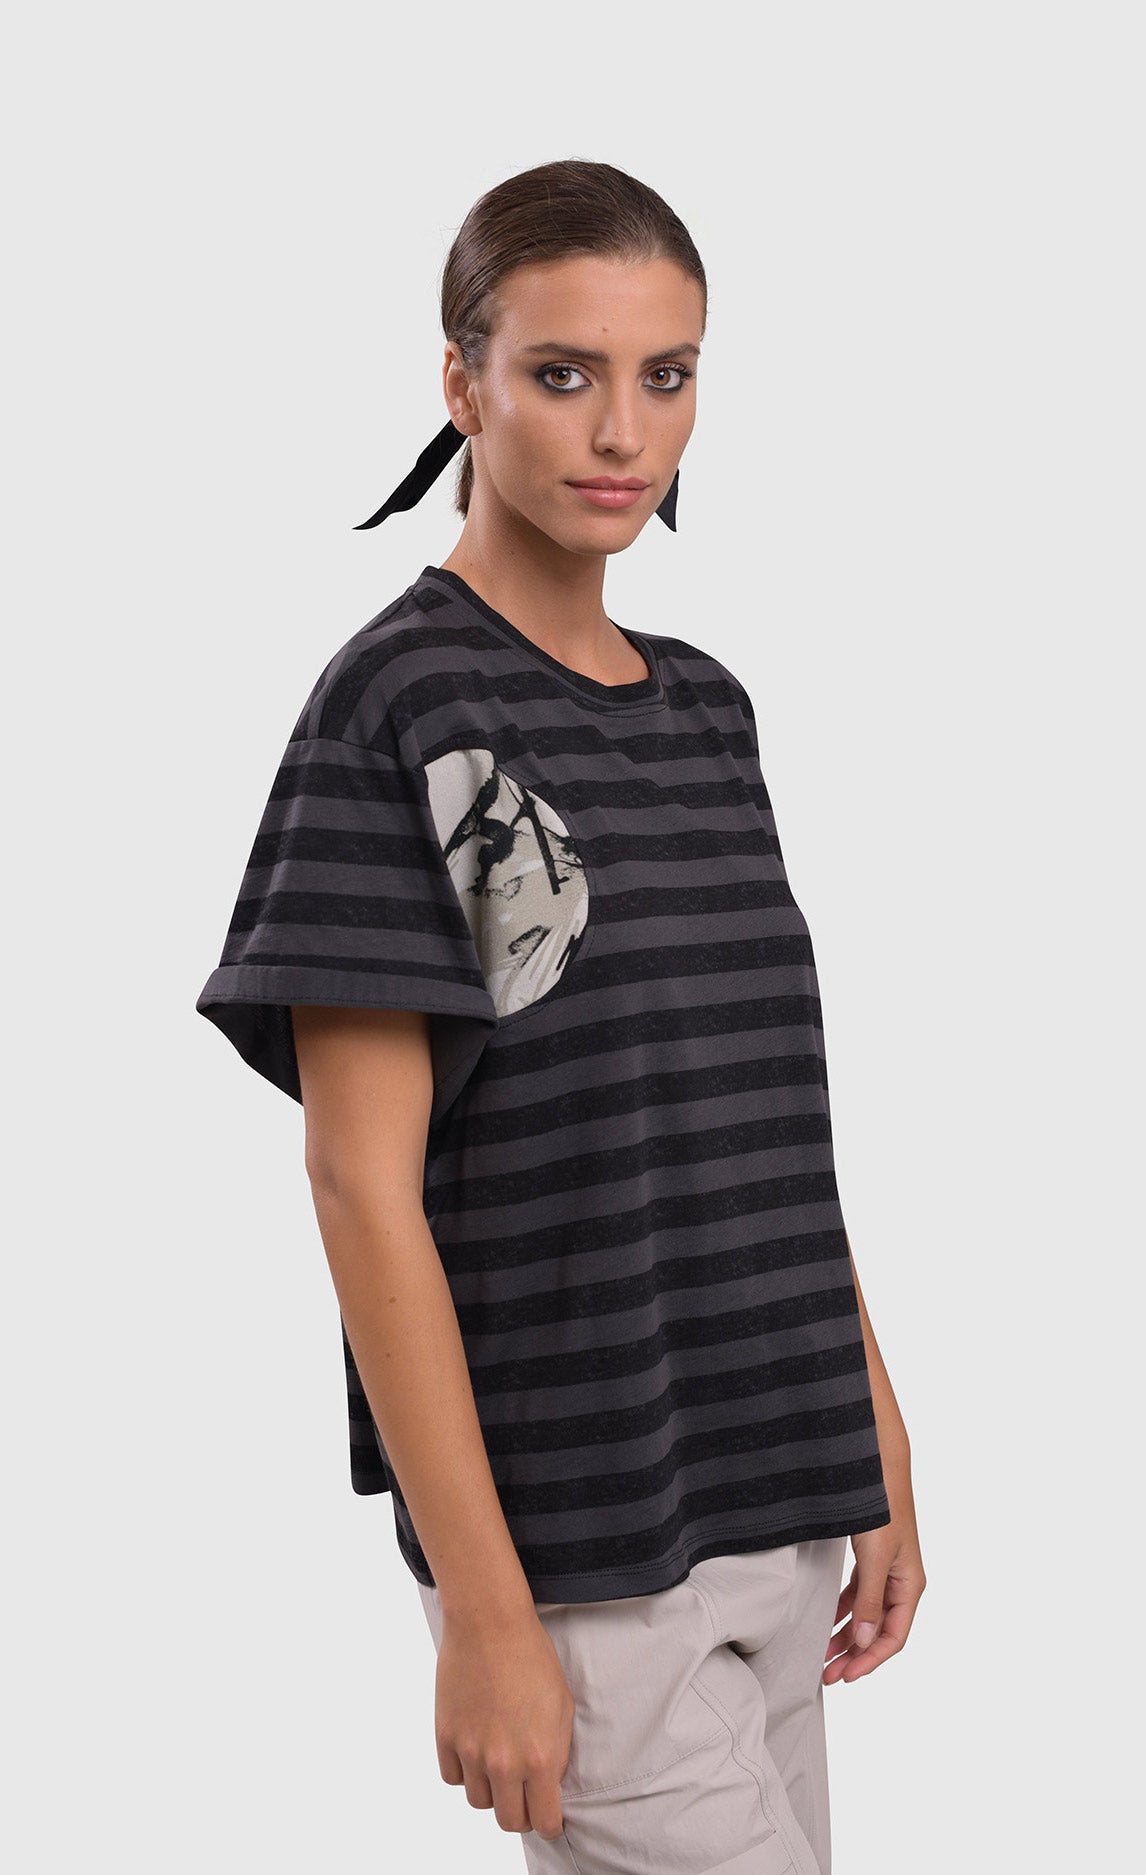 Front top half view of a woman wearing the alembika urban stripe moon boxy tee. This top has grey and black striping with two circular patches of a white fabric that have a scribble print on them. The top has a crew neck, a wide silhouette, and short sleeves.